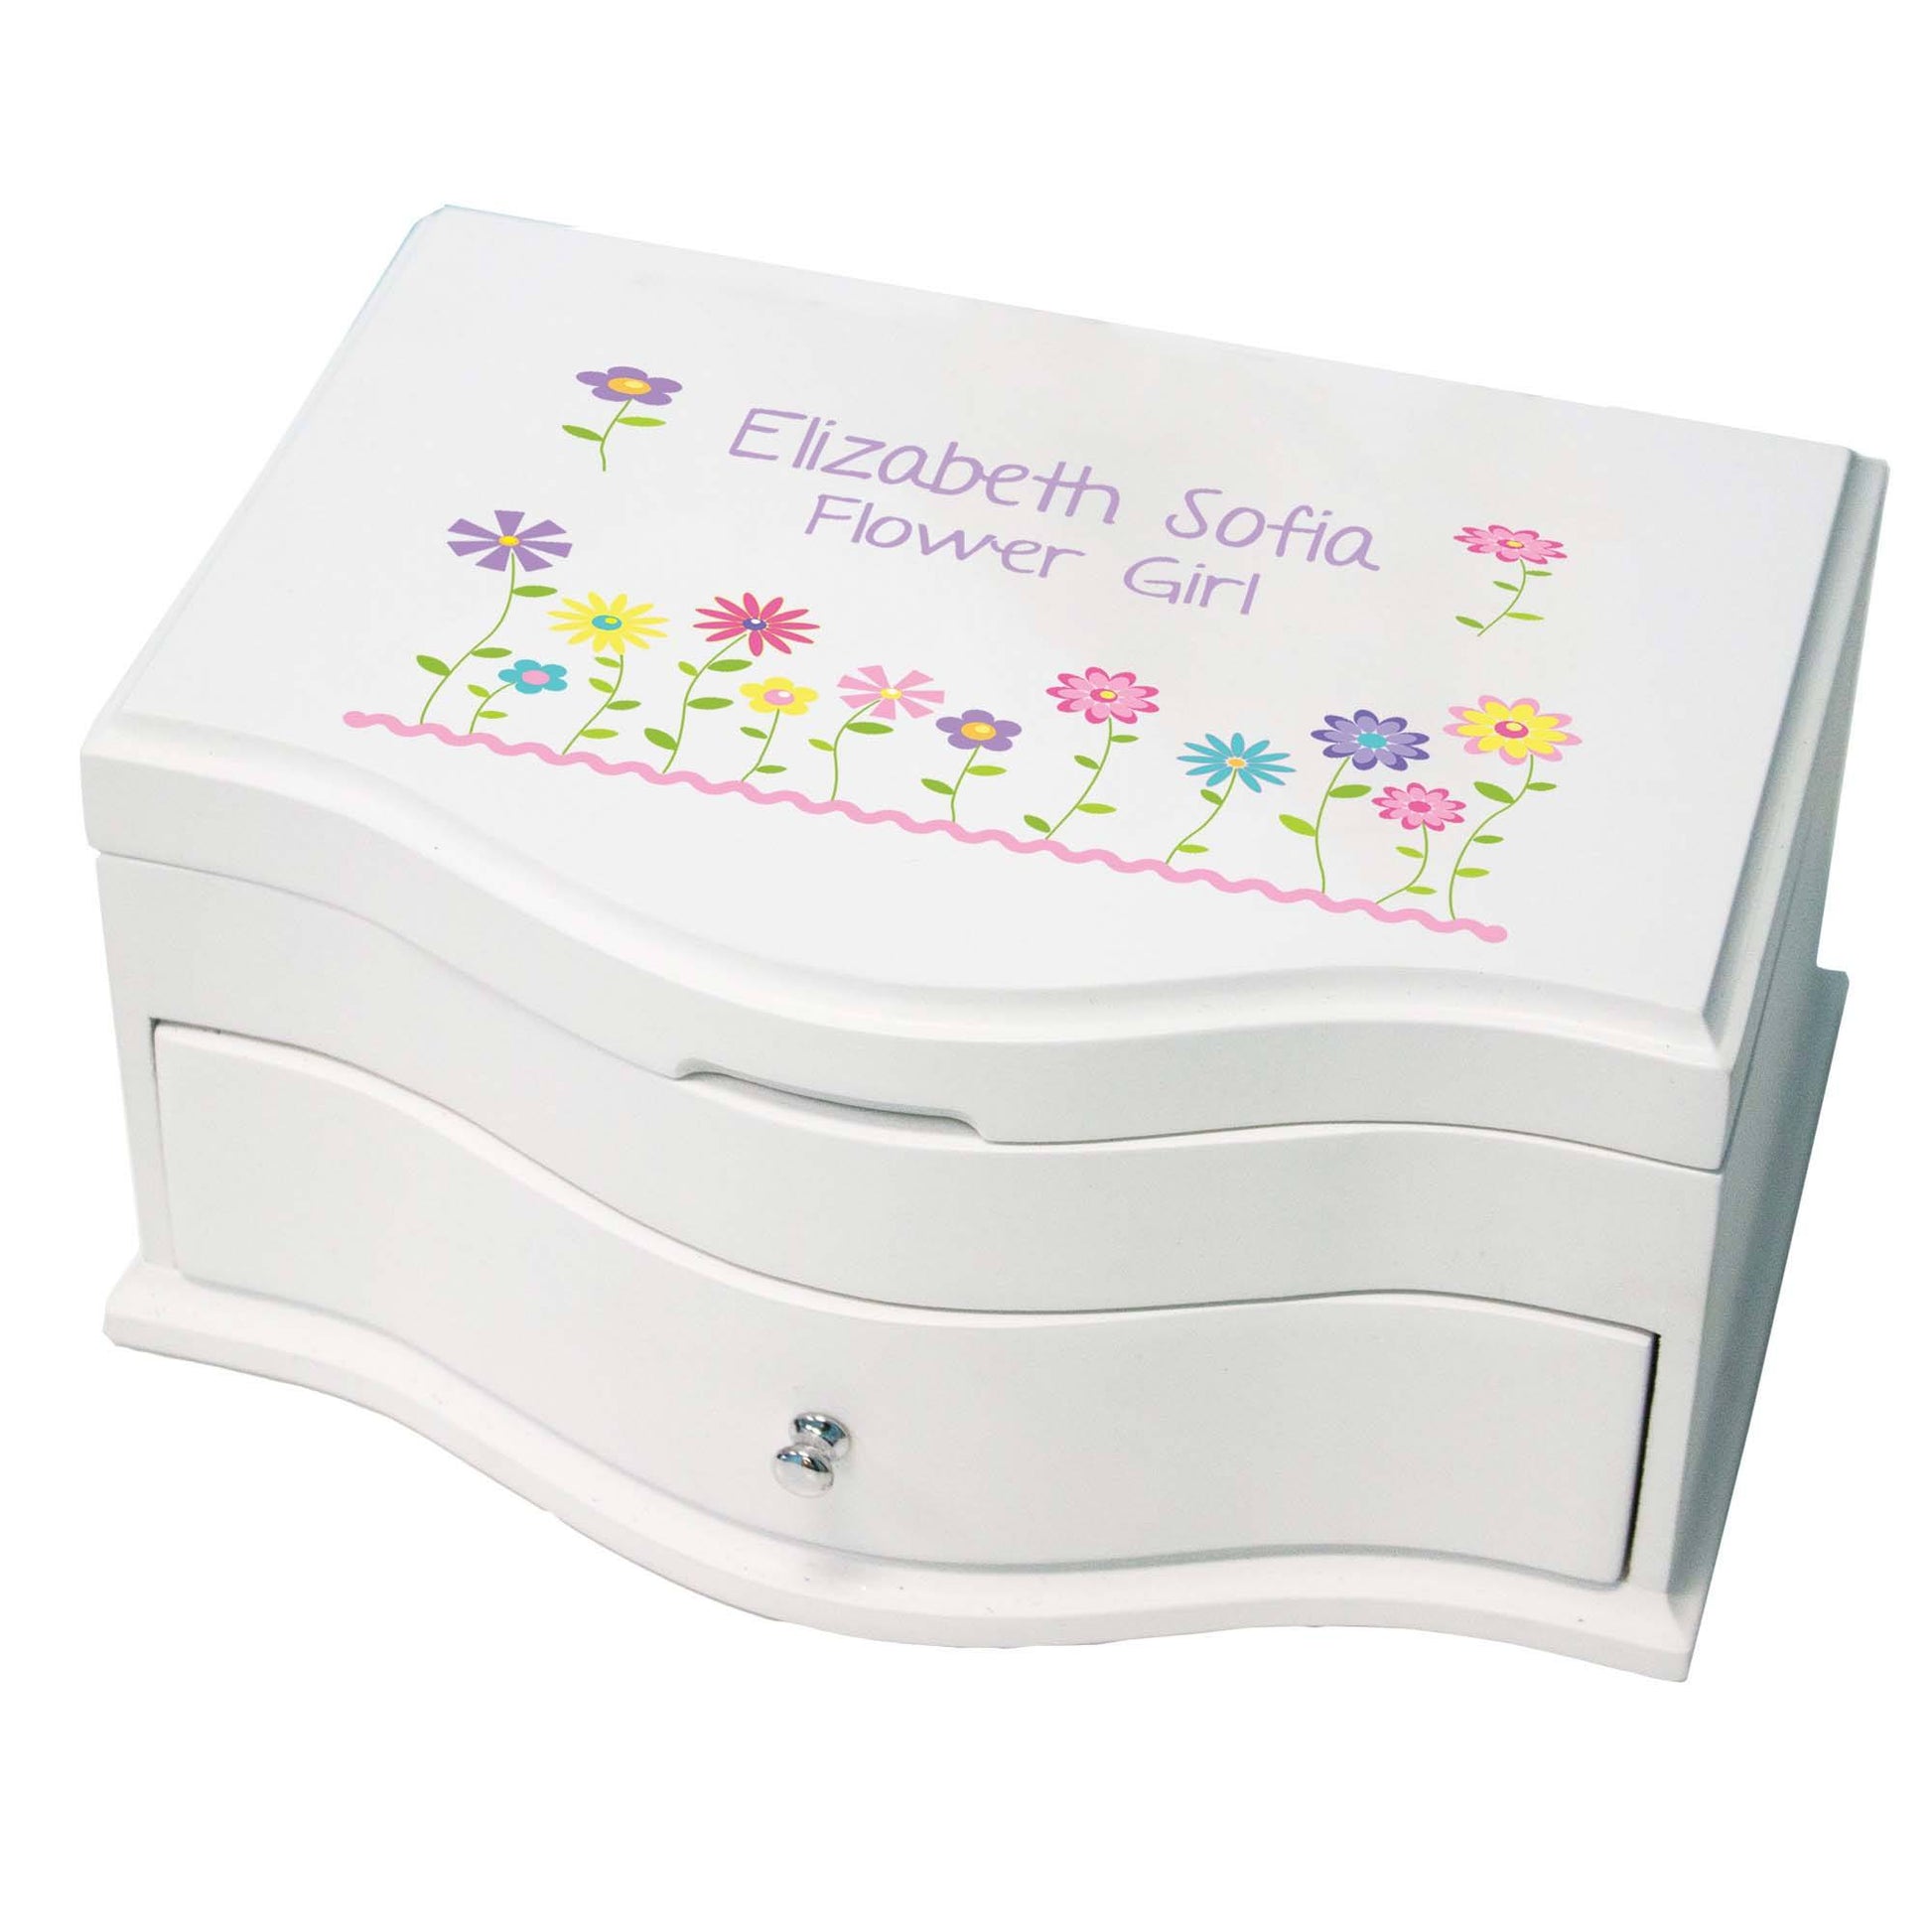 Princess Girls Jewelry Box with Stemmed Flowers design